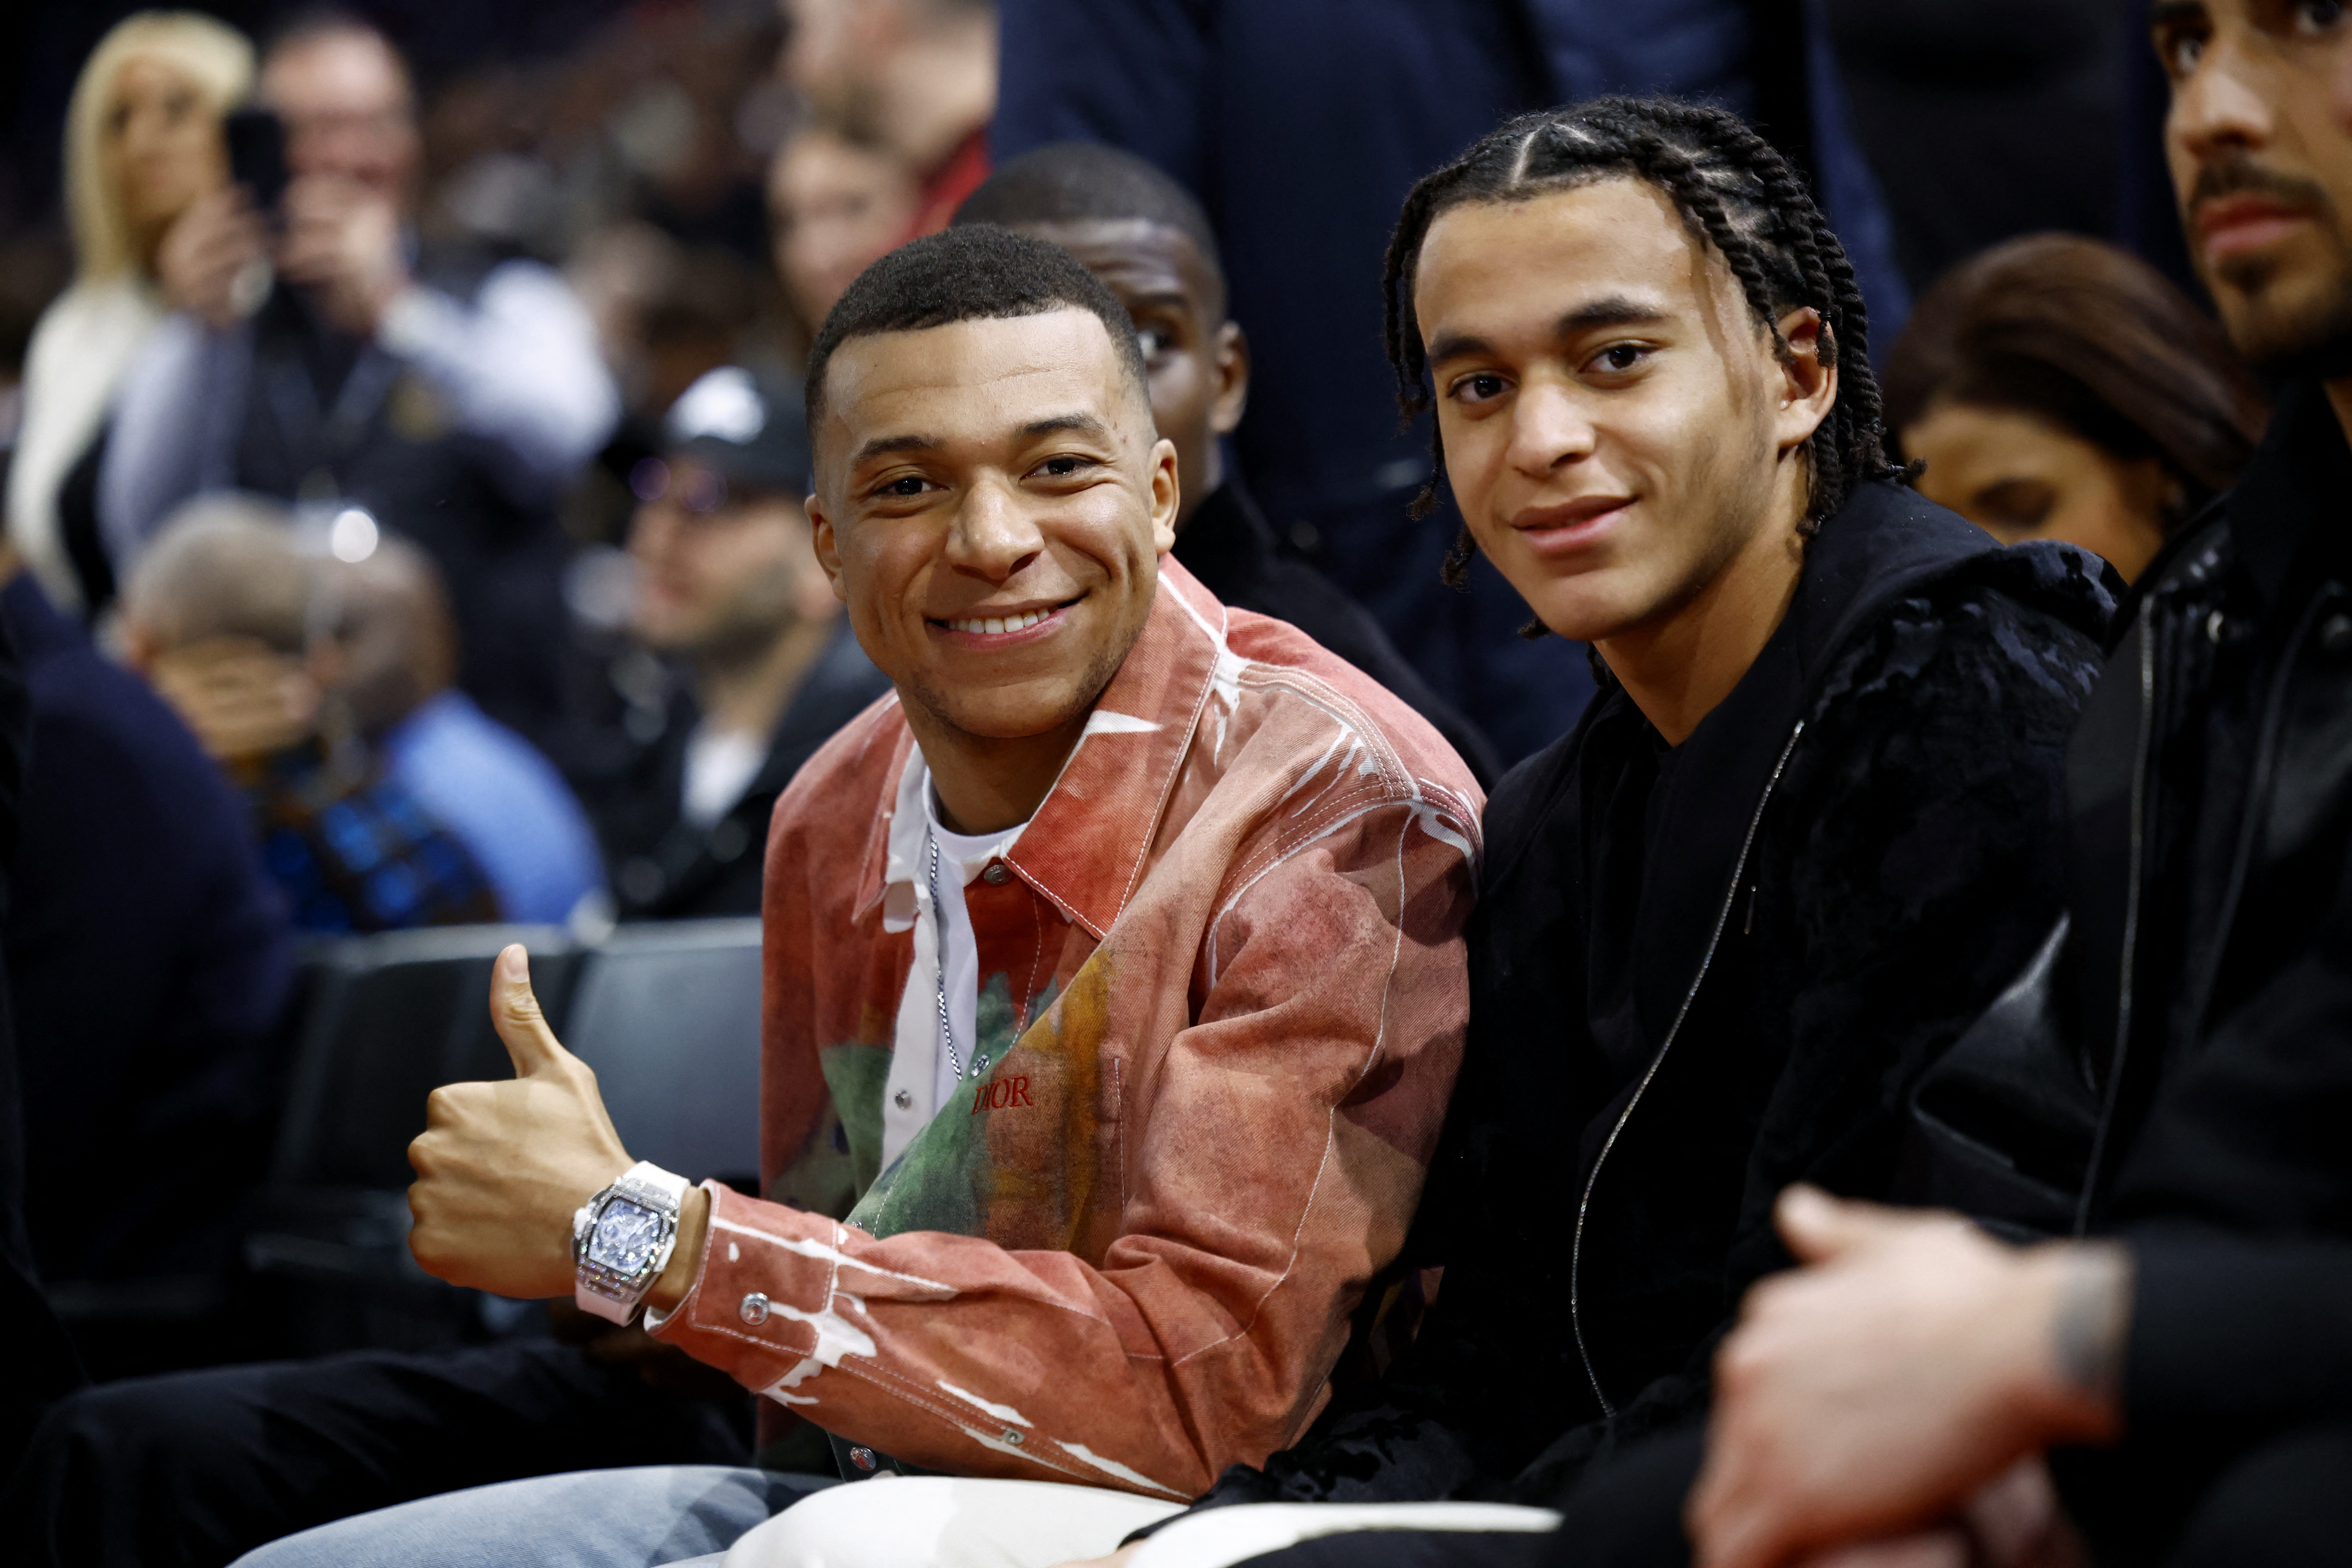 Mbappe, 25, sat next to little brother Ethan